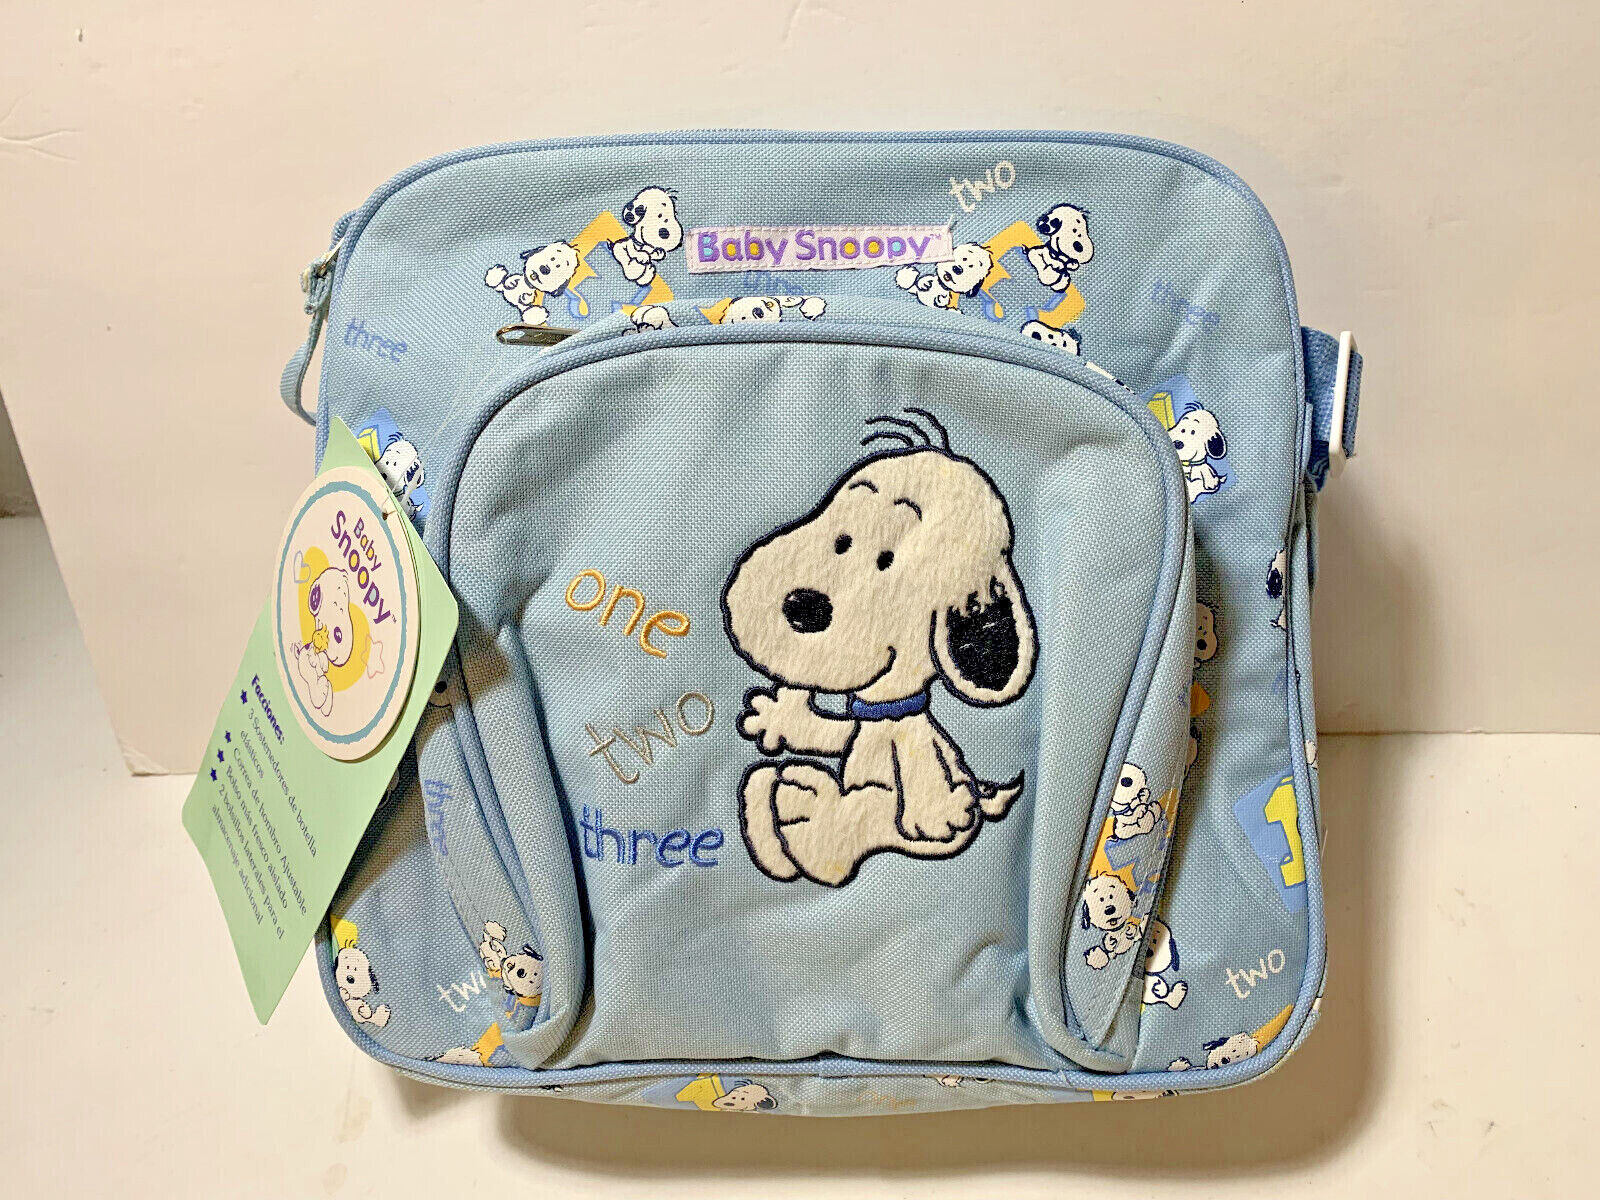 Vintage Retro Nwt Baby Snoopy Bottle Bag Peanuts For Your Cutie Pie